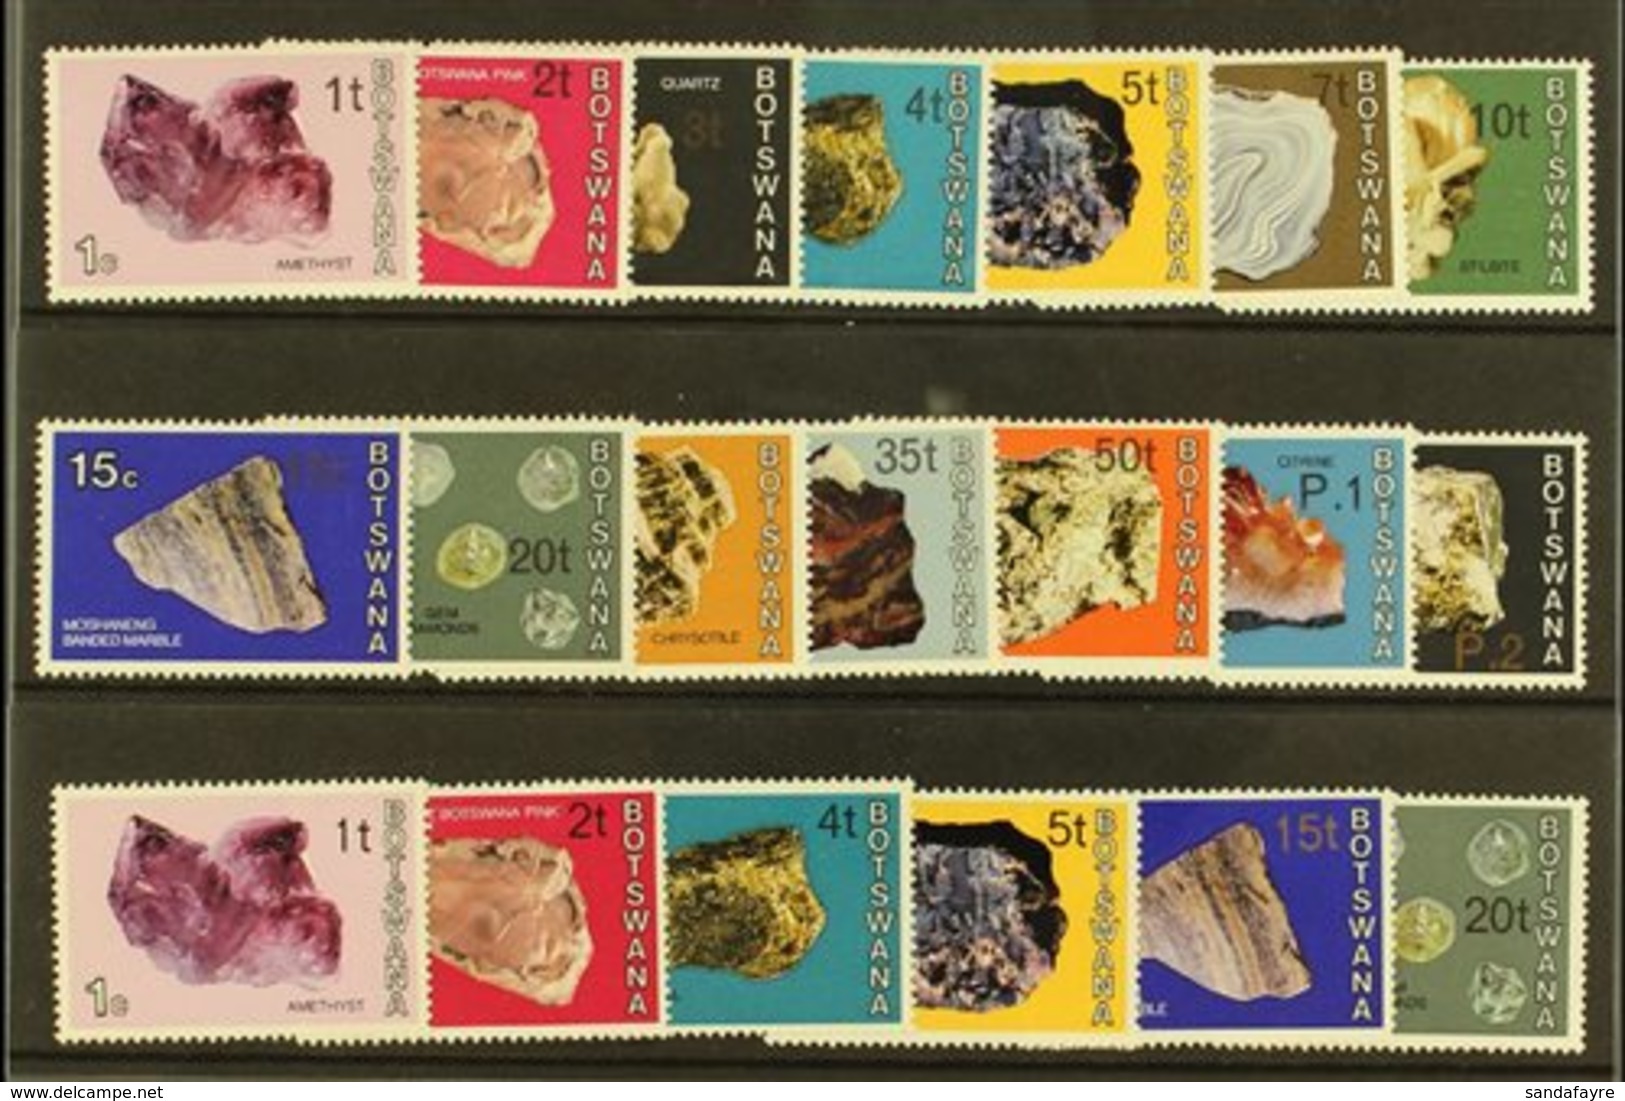 1976-7 Minerals Surcharges, Complete Sets Of Type I & II Ovpts (not Incl. Scarce Pretoria Ovpts), SG 367/80, 367a/75a, N - Botswana (1966-...)